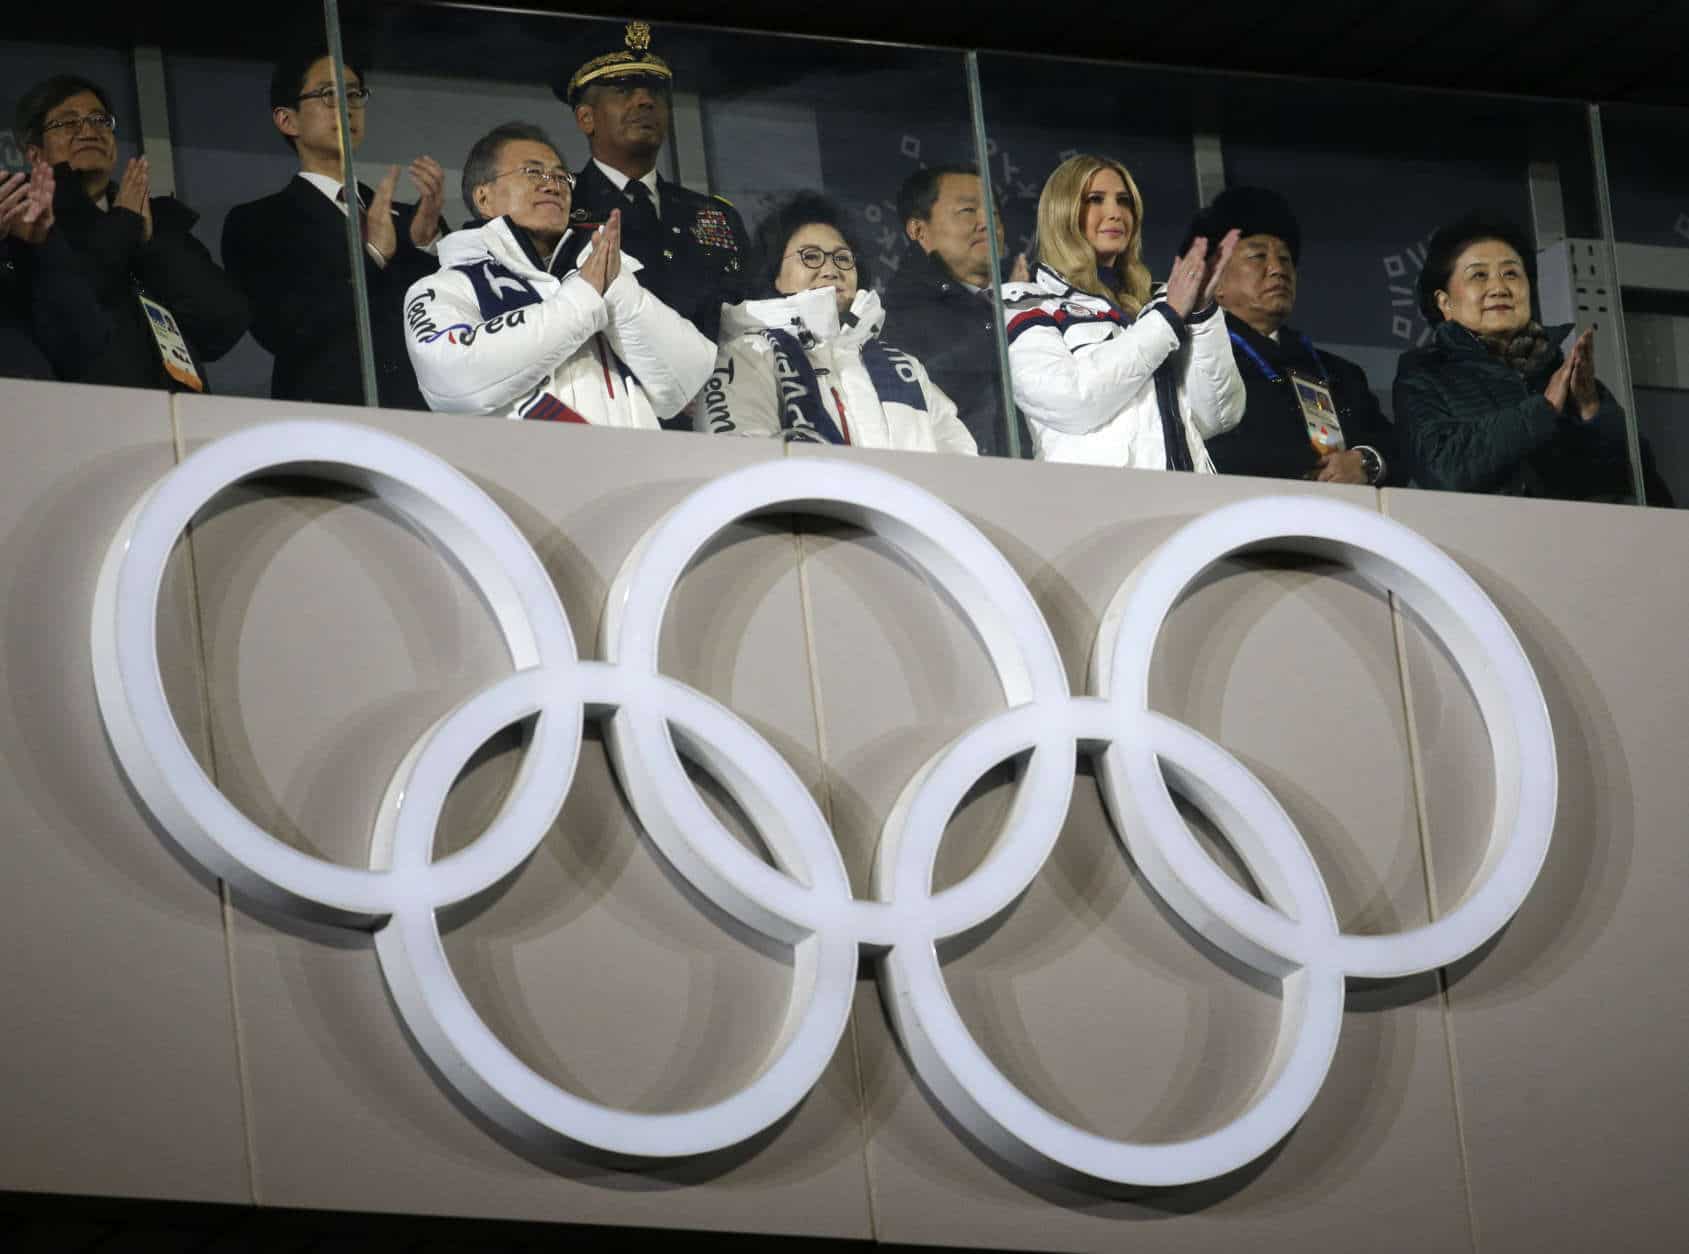 South Korean President Moon Jae-in, front left, and Ivanka Trump, front right U.S. President Donald Trump's daughter applaud during the closing ceremony of the 2018 Winter Olympics in Pyeongchang, South Korea, Sunday, Feb. 25, 2018. (AP Photo/Natacha Pisarenko)